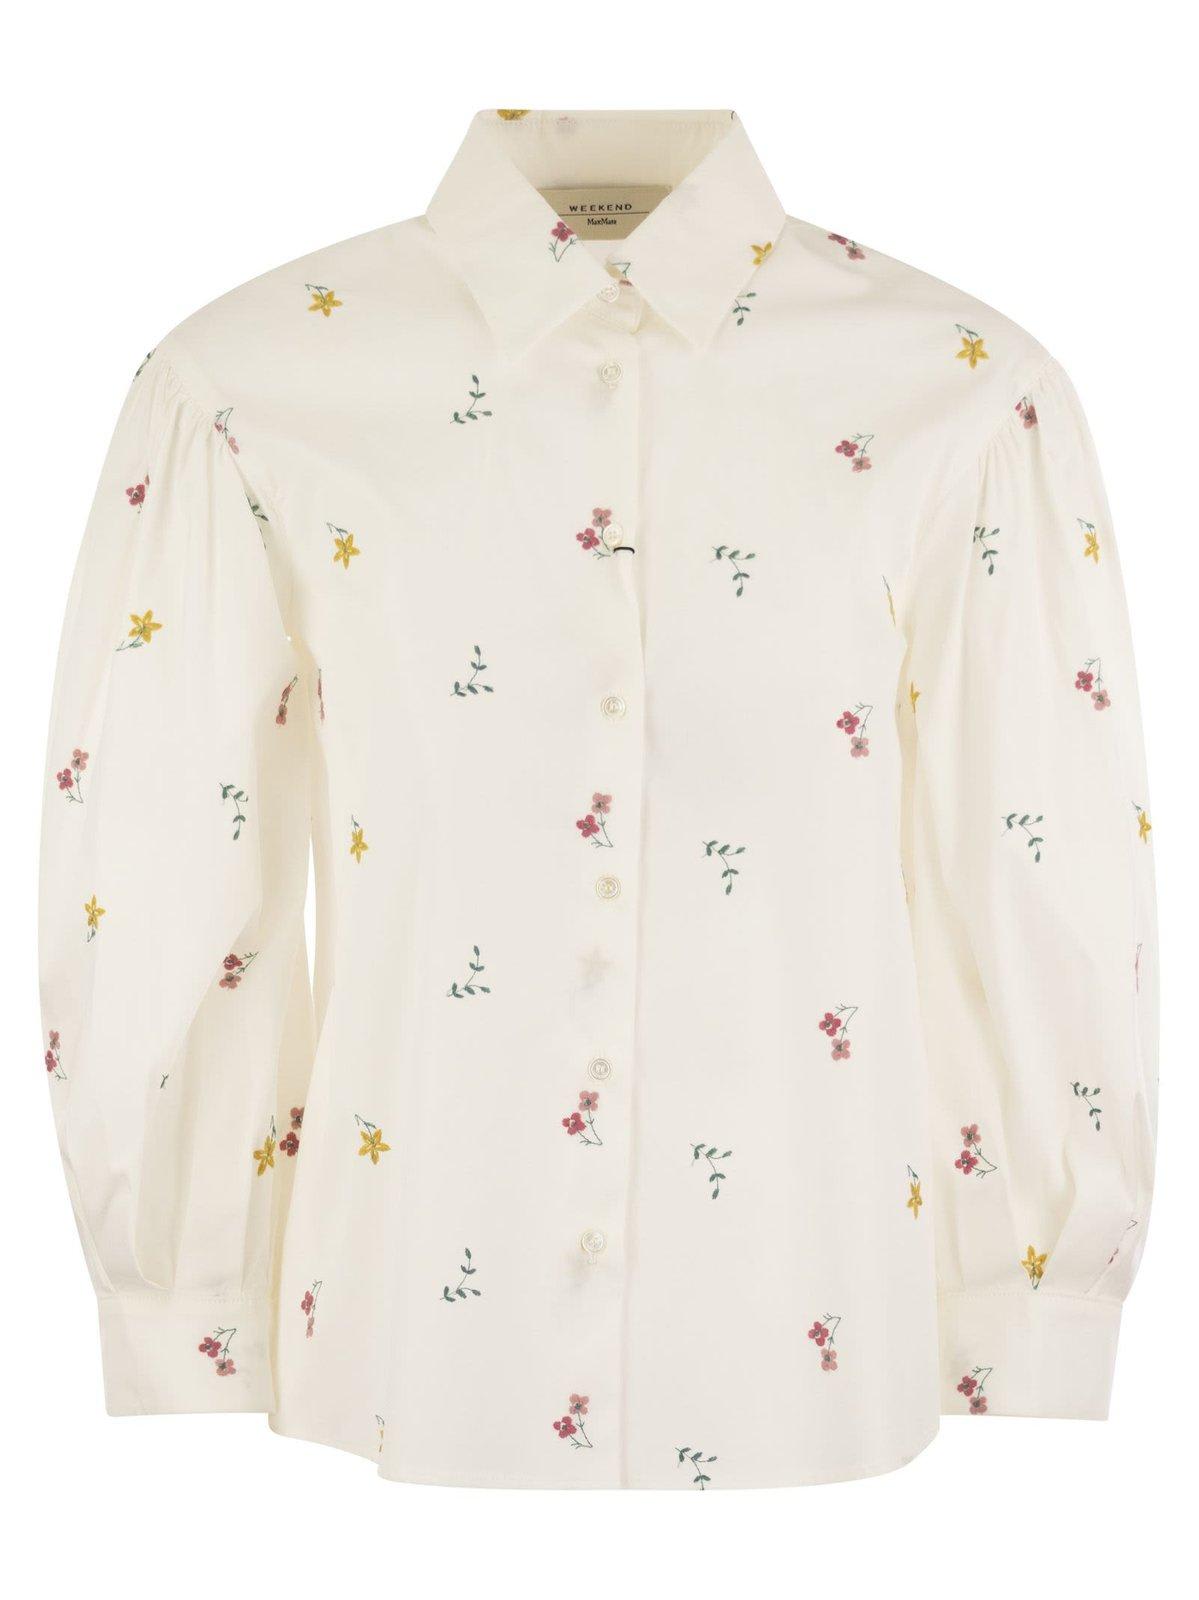 All-over Floral Patterned Long-sleeved Shirt